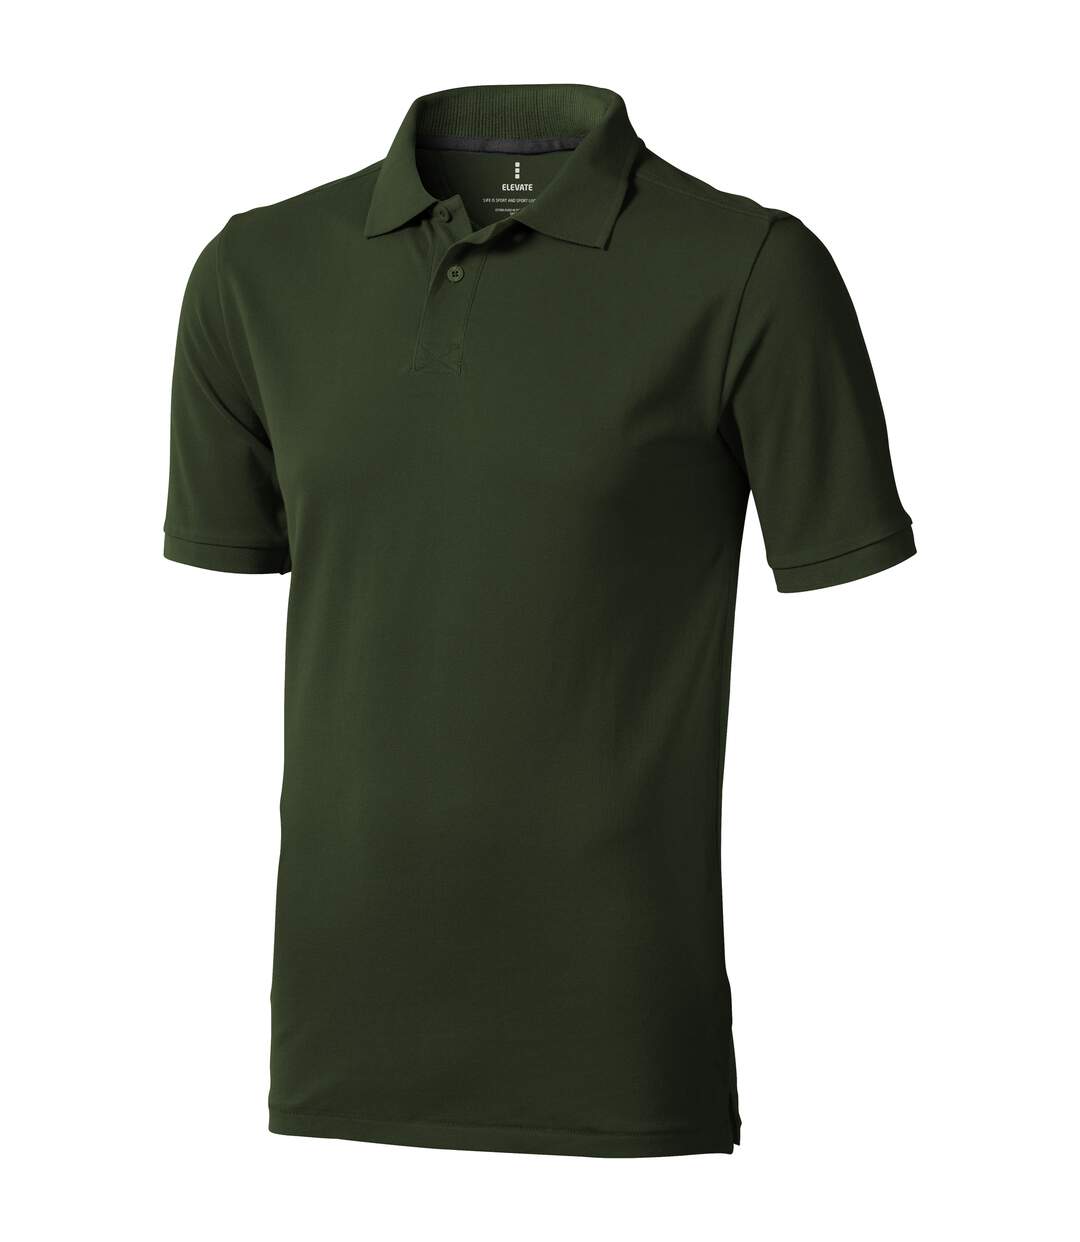 Elevate - Polo manches courtes Calgary - Homme (Vert militaire) - UTPF1816